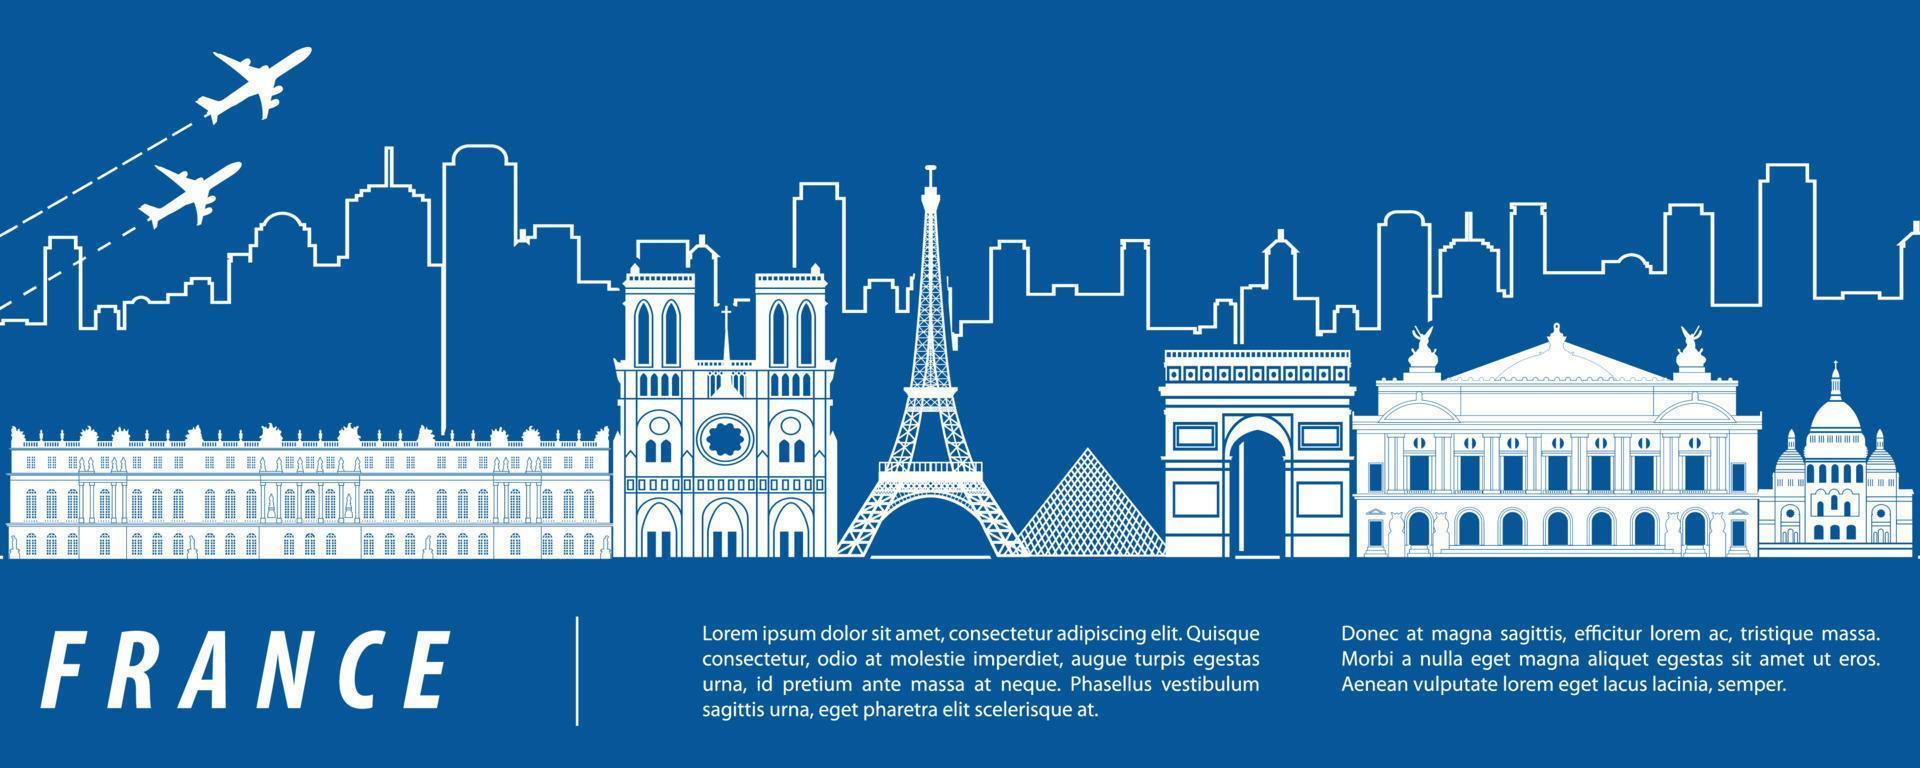 France famous landmark silhouette with blue and white color design vector